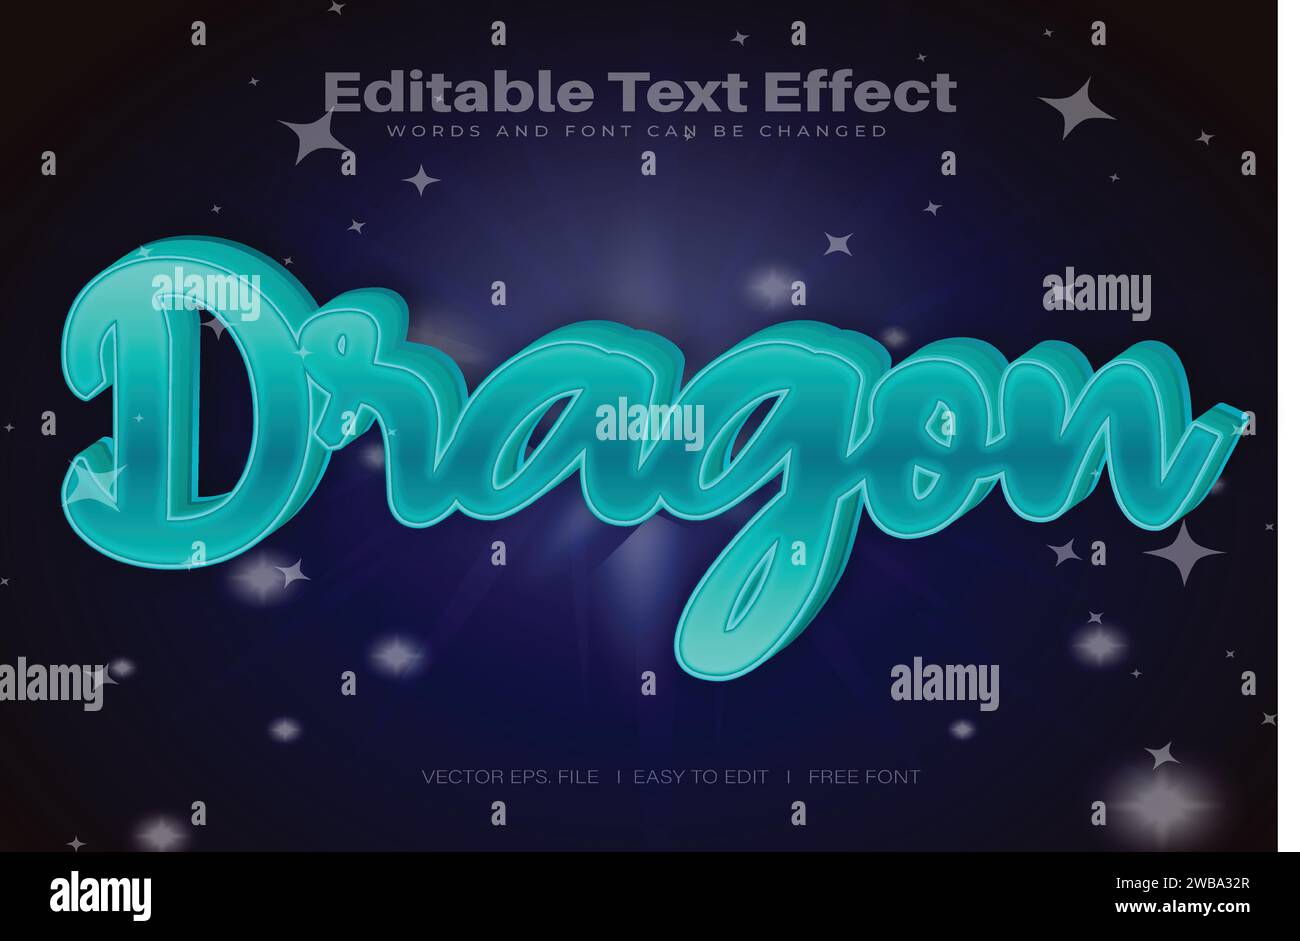 Vector Dragon 3d text effect 100 editable eps file word and font can be changed Stock Vector